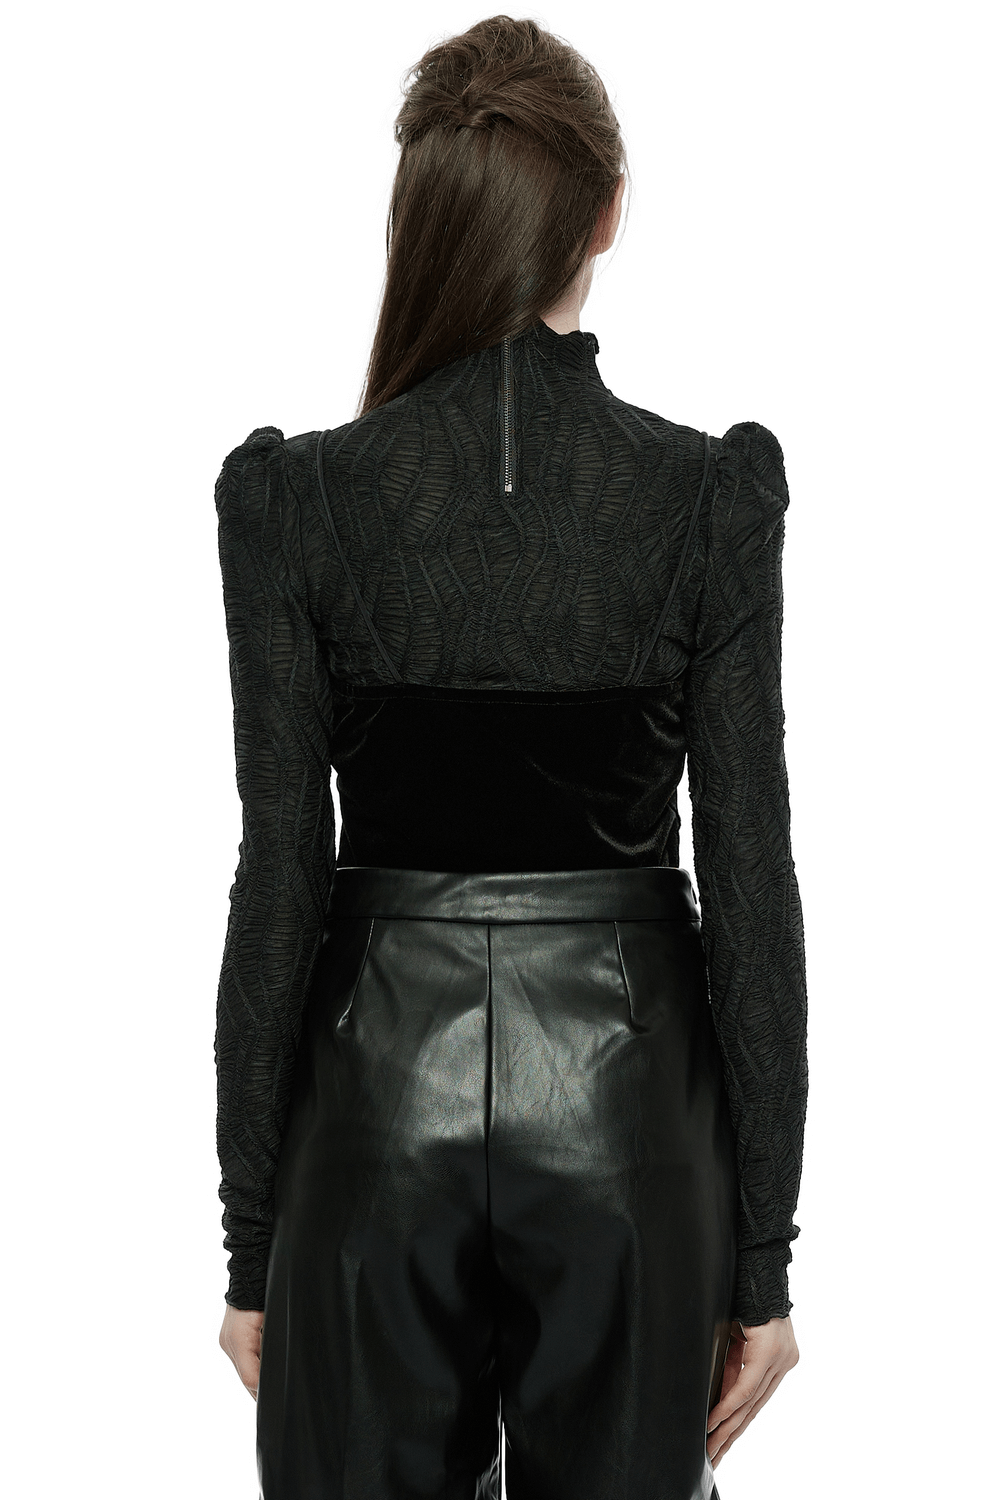 Elastic Wrinkled Two-Piece Gothic Long Sleeves Top